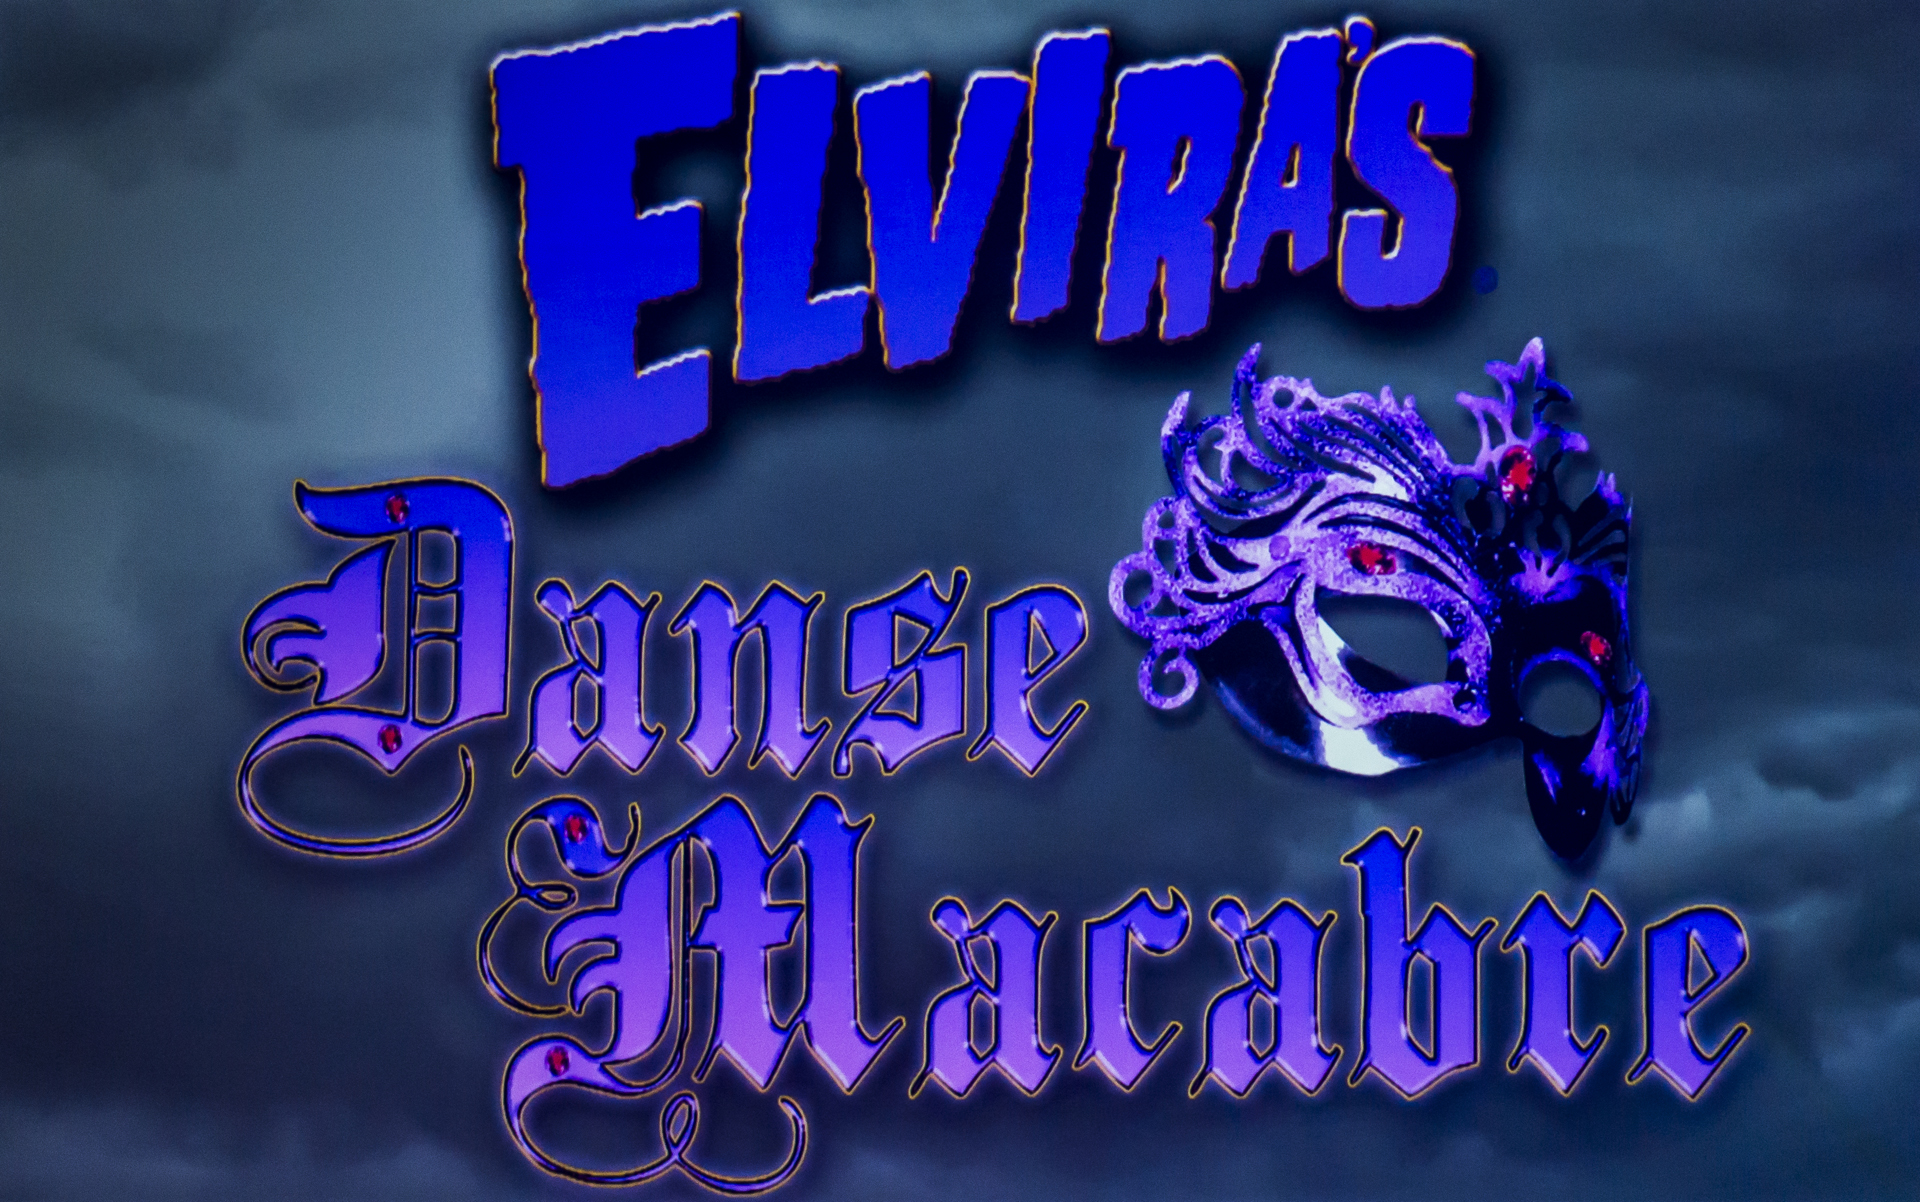  Elvira will be back with another dance and acrobatics variety show. (Image courtesy of Knott's Scary Farm) 